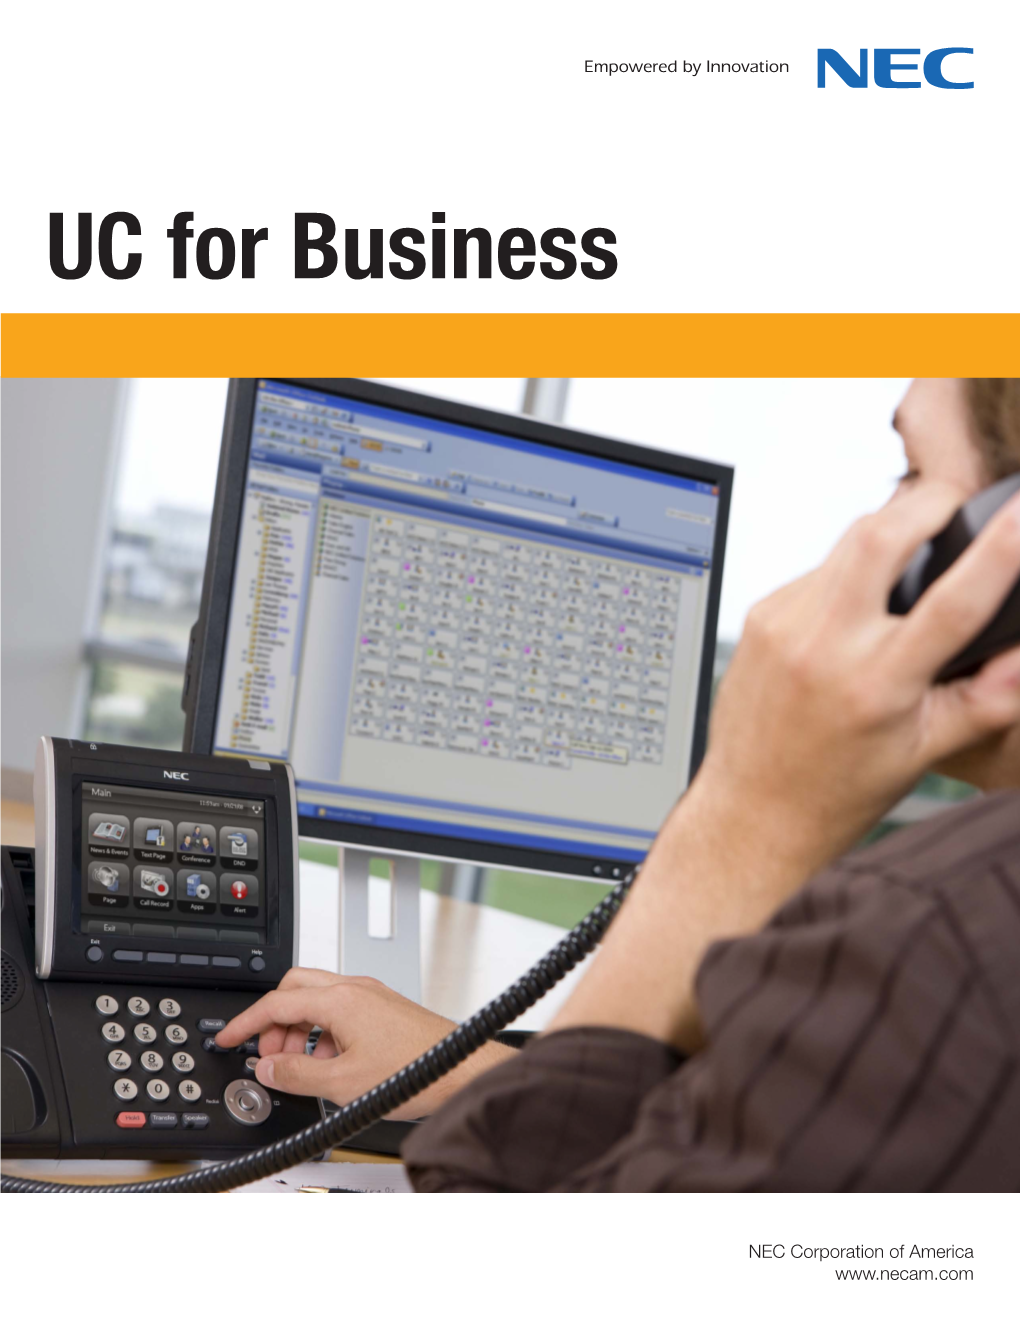 NEC's UC for Business